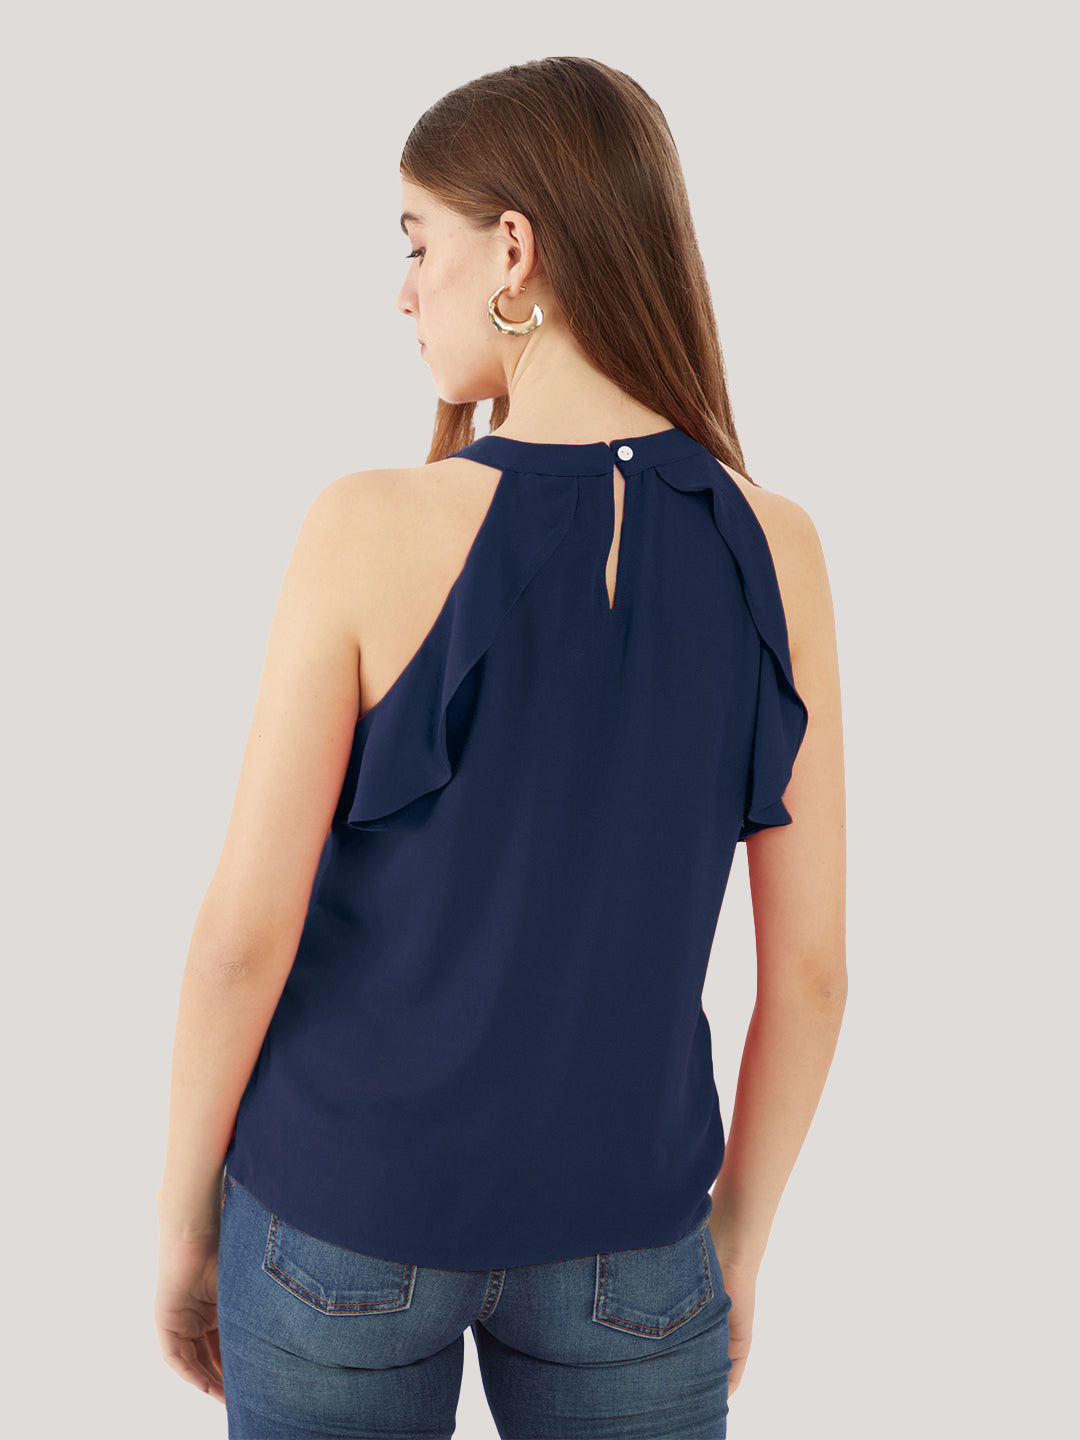 Navy-Blue-Solid-Ruffled-Top-for-Women-VT02364_106-Navy-4